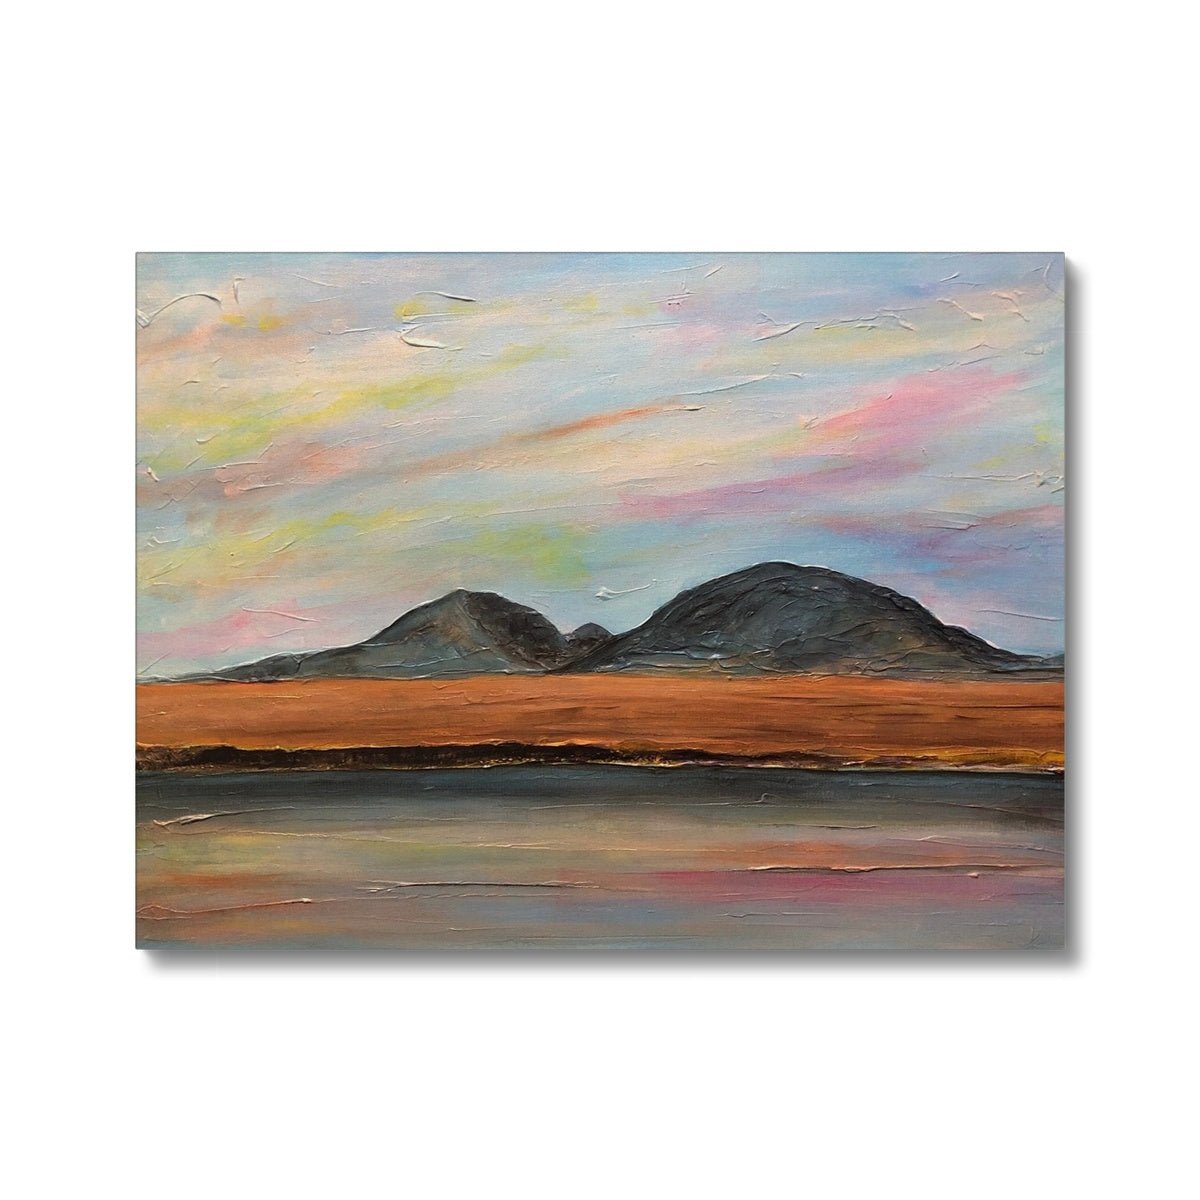 Jura Dawn Painting | Canvas From Scotland-Contemporary Stretched Canvas Prints-Hebridean Islands Art Gallery-24"x18"-Paintings, Prints, Homeware, Art Gifts From Scotland By Scottish Artist Kevin Hunter